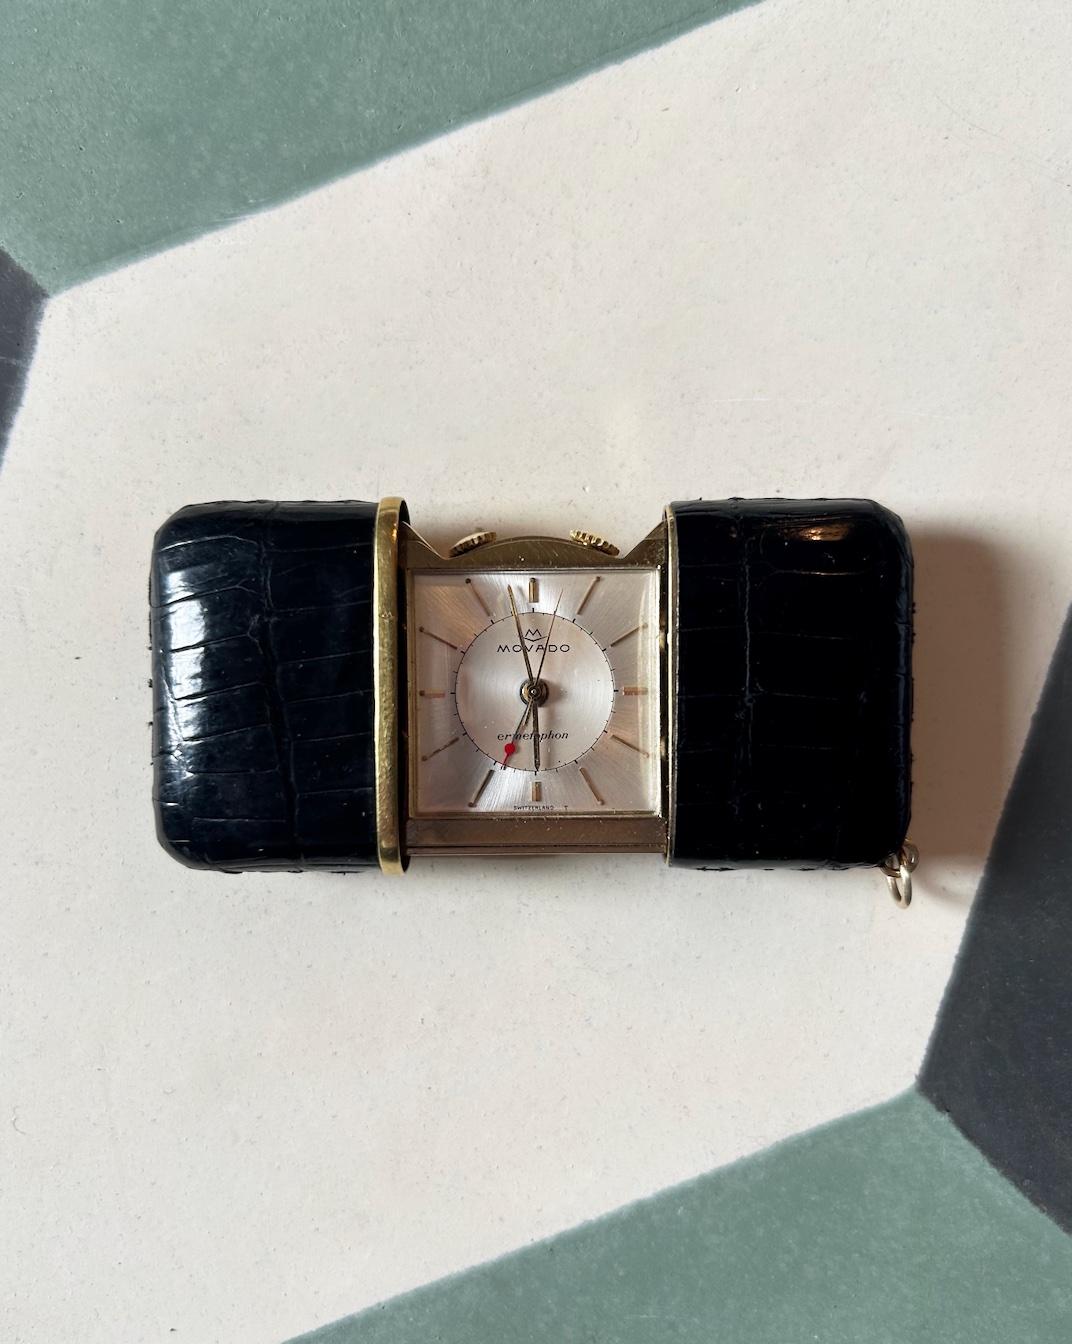 Swiss Movado ‘Ermetophon’ Purse Watch with Alarm, 1950s